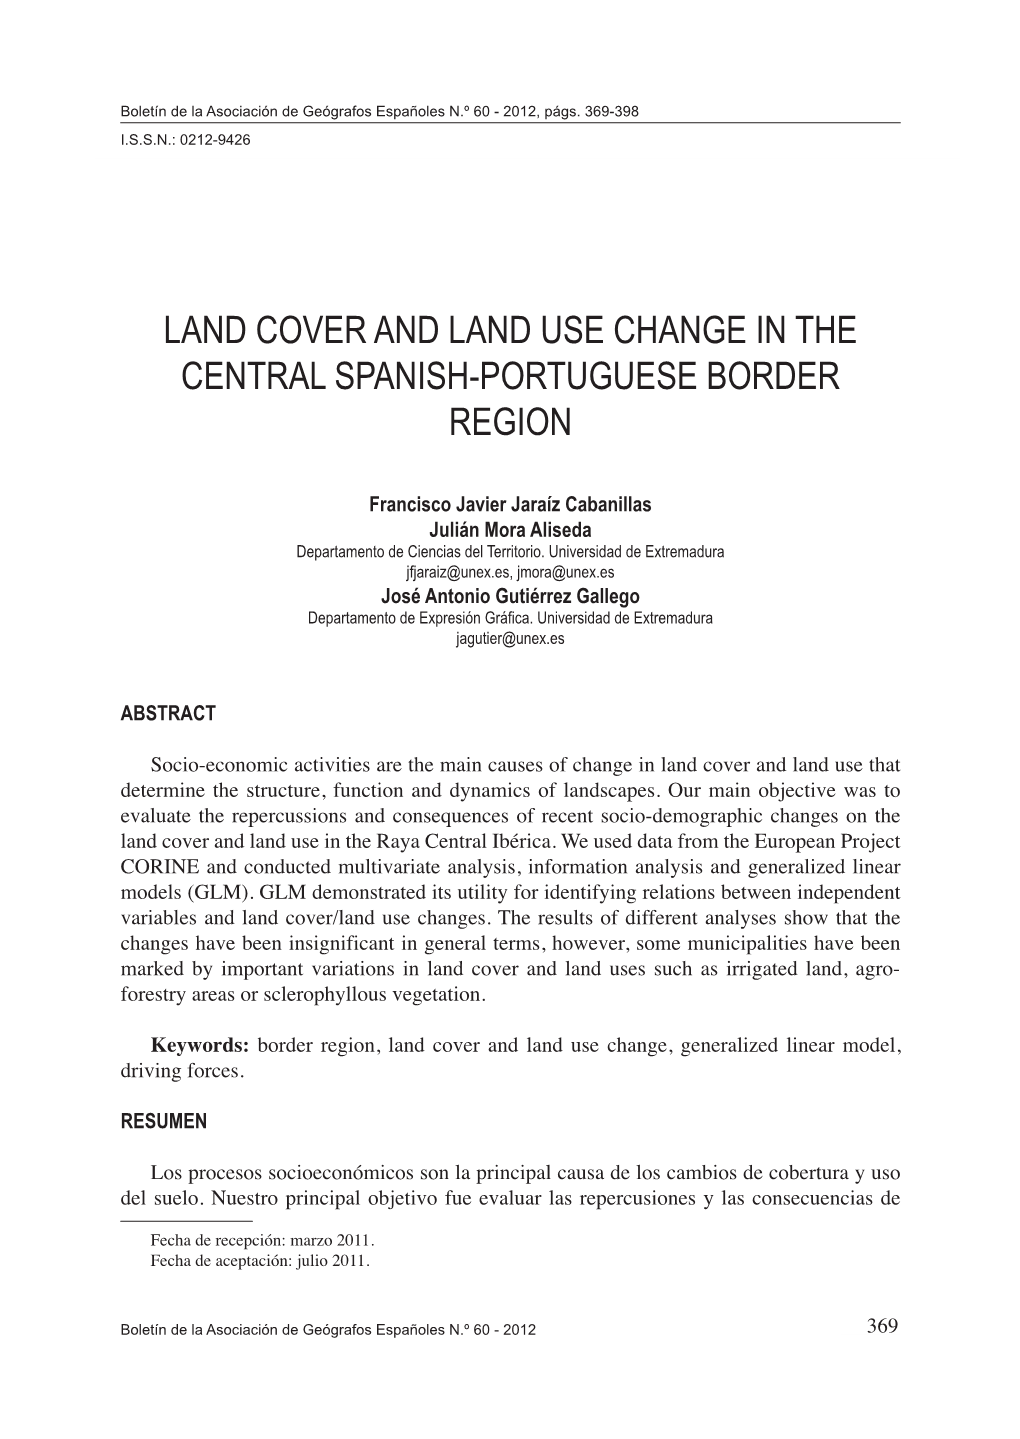 Land Cover and Land Use Change in the Central Spanish-Portuguese Border Region